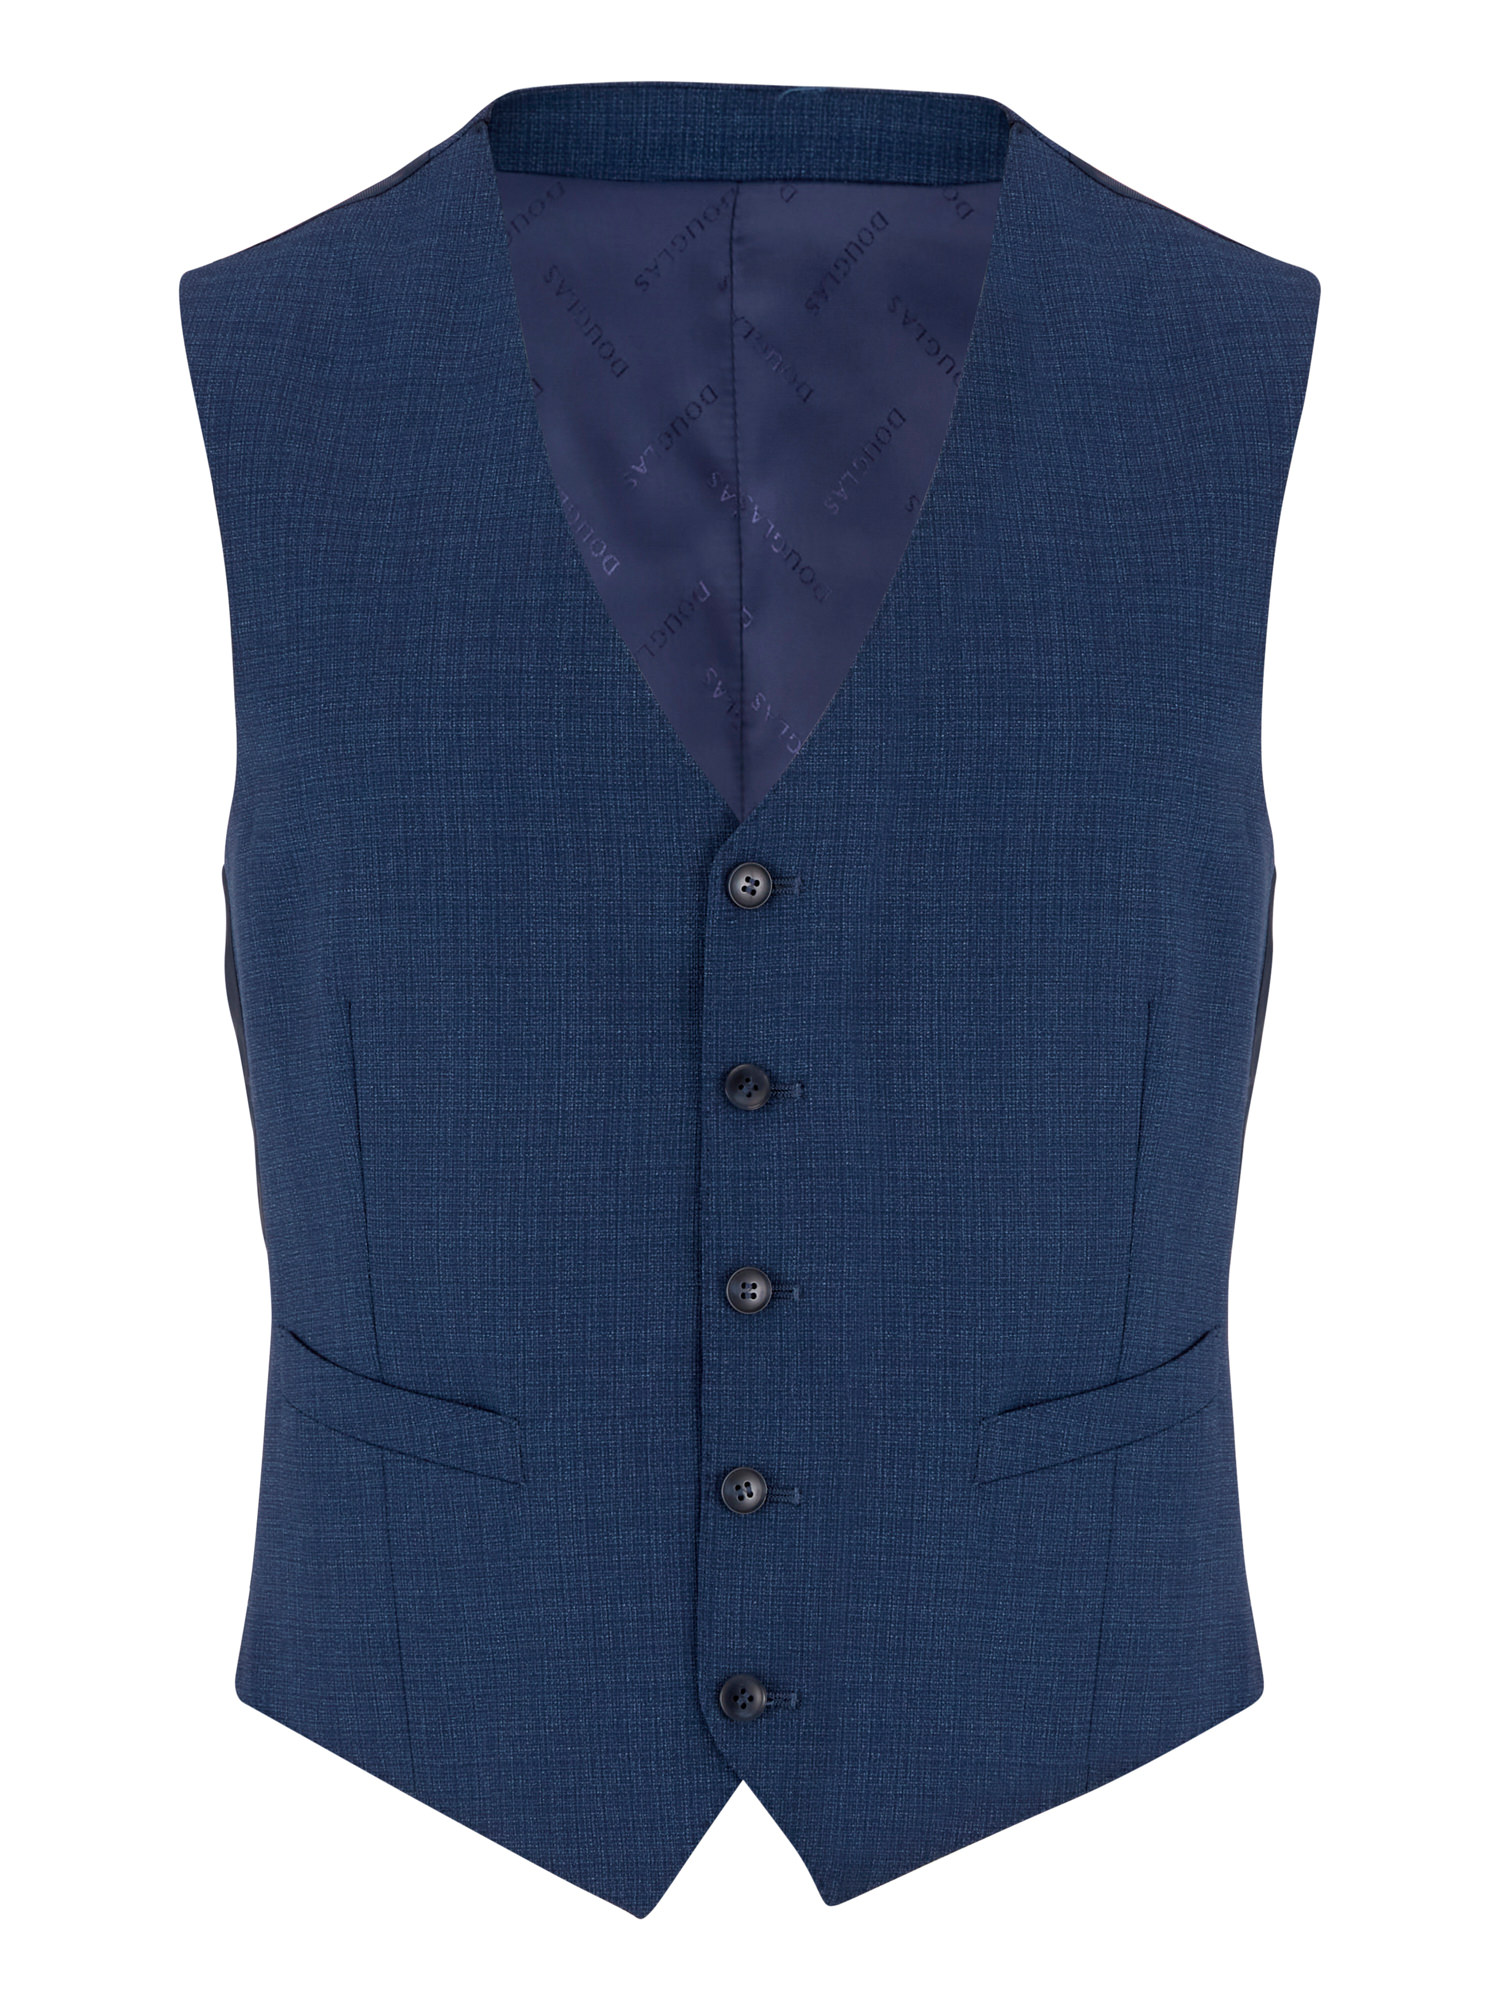 Blue Woven Douglas Textured Suit - Tom Murphy's Formal and Menswear